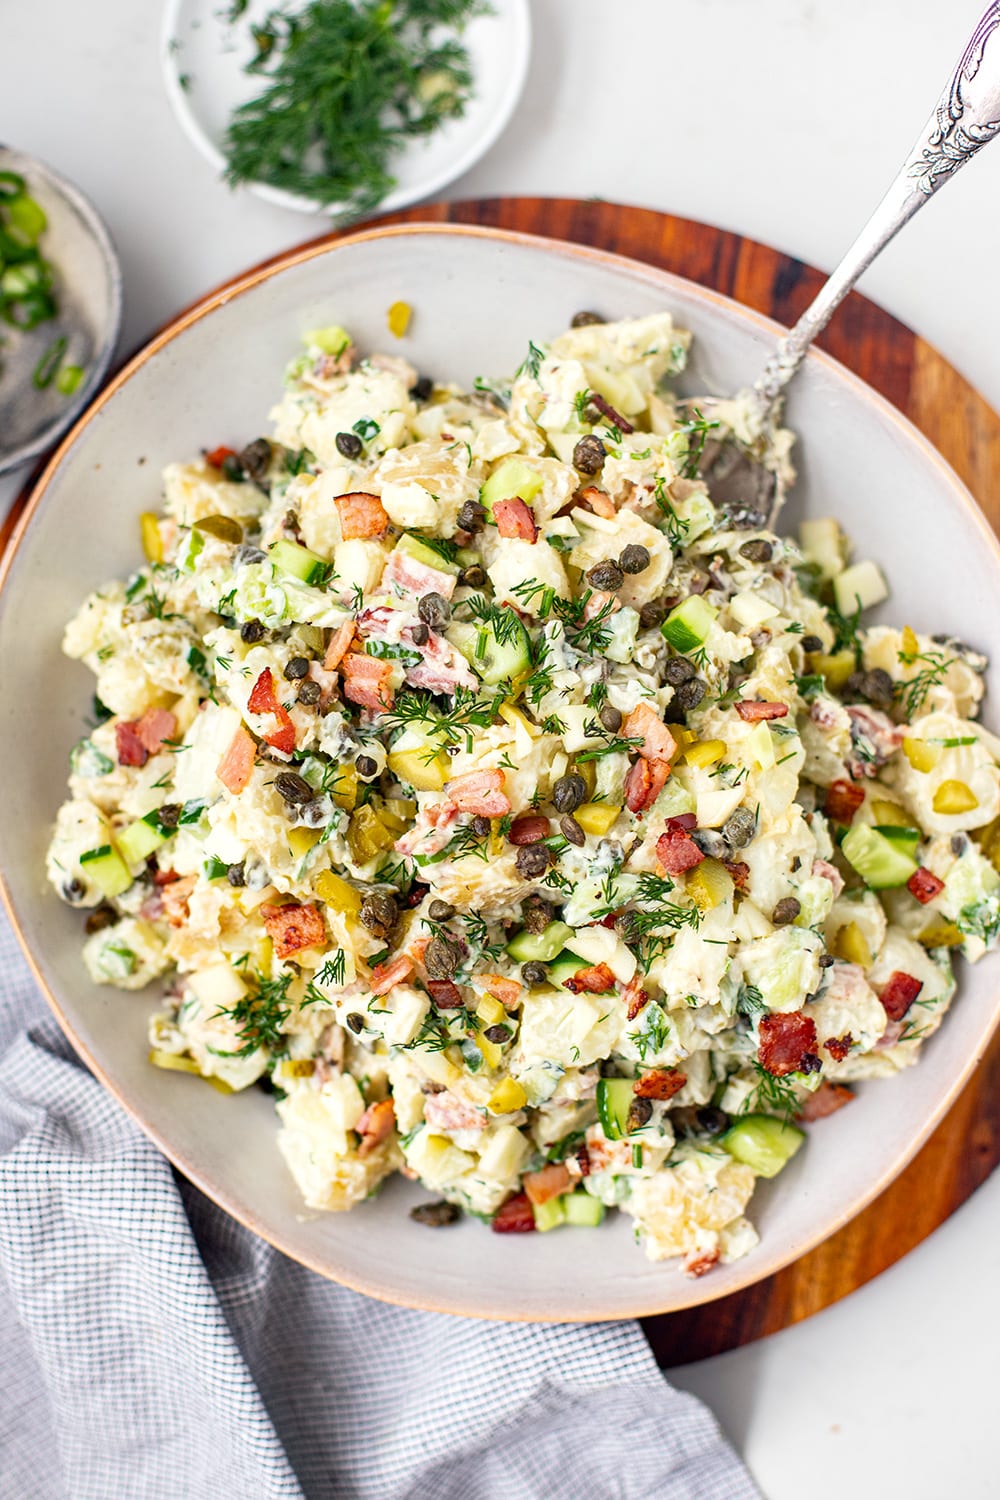 Potato salad recipe with bacon, capers and dill